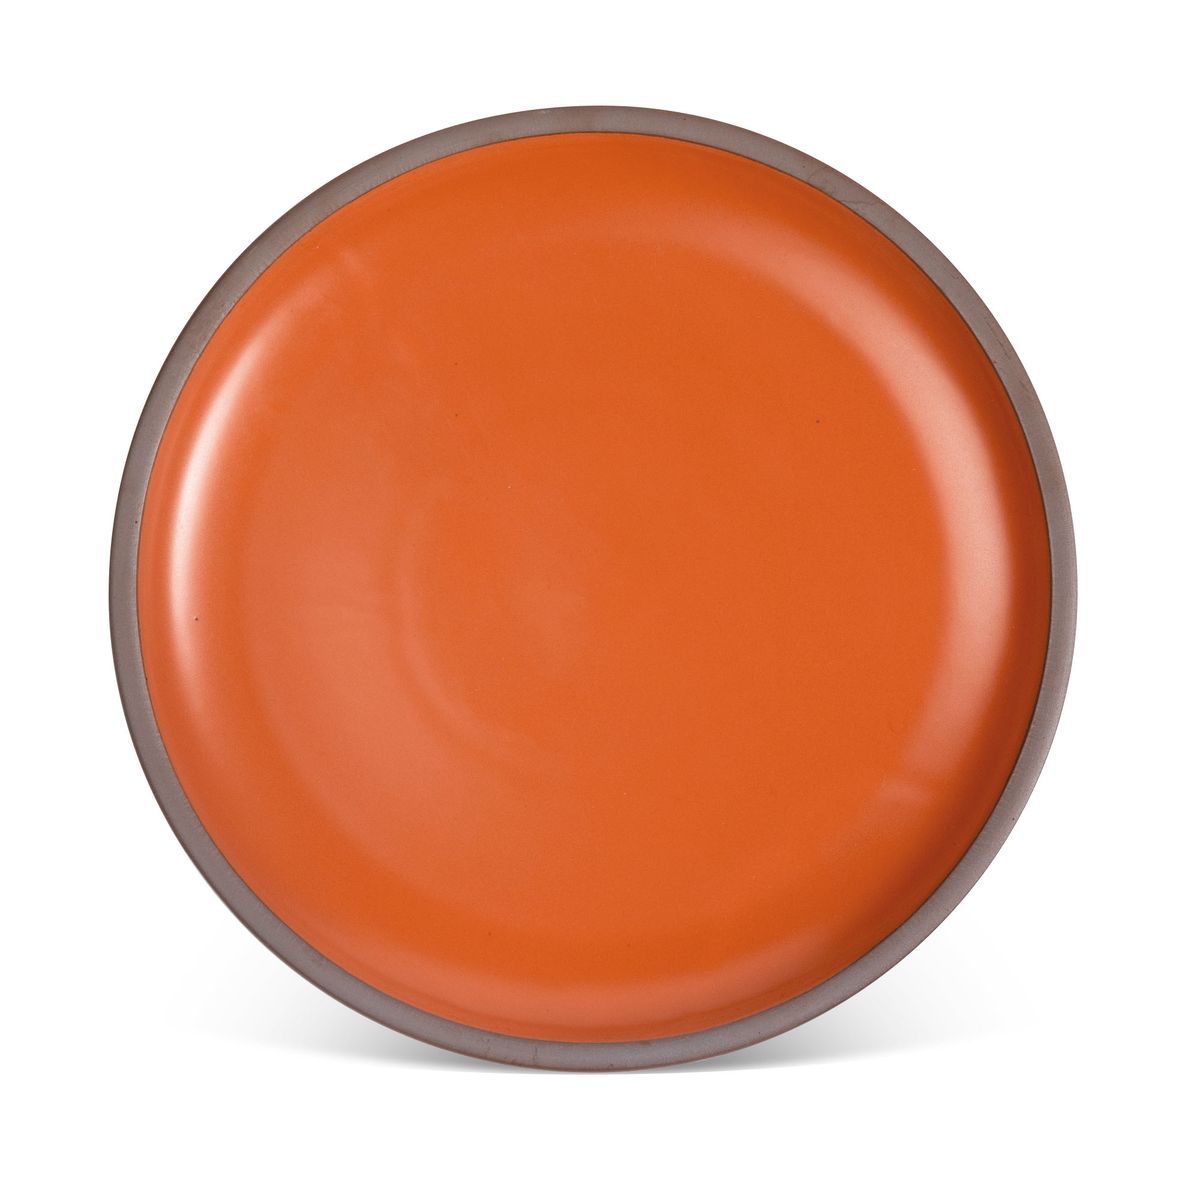 A large ceramic platter in a bold orange color featuring iron speckles and an unglazed rim